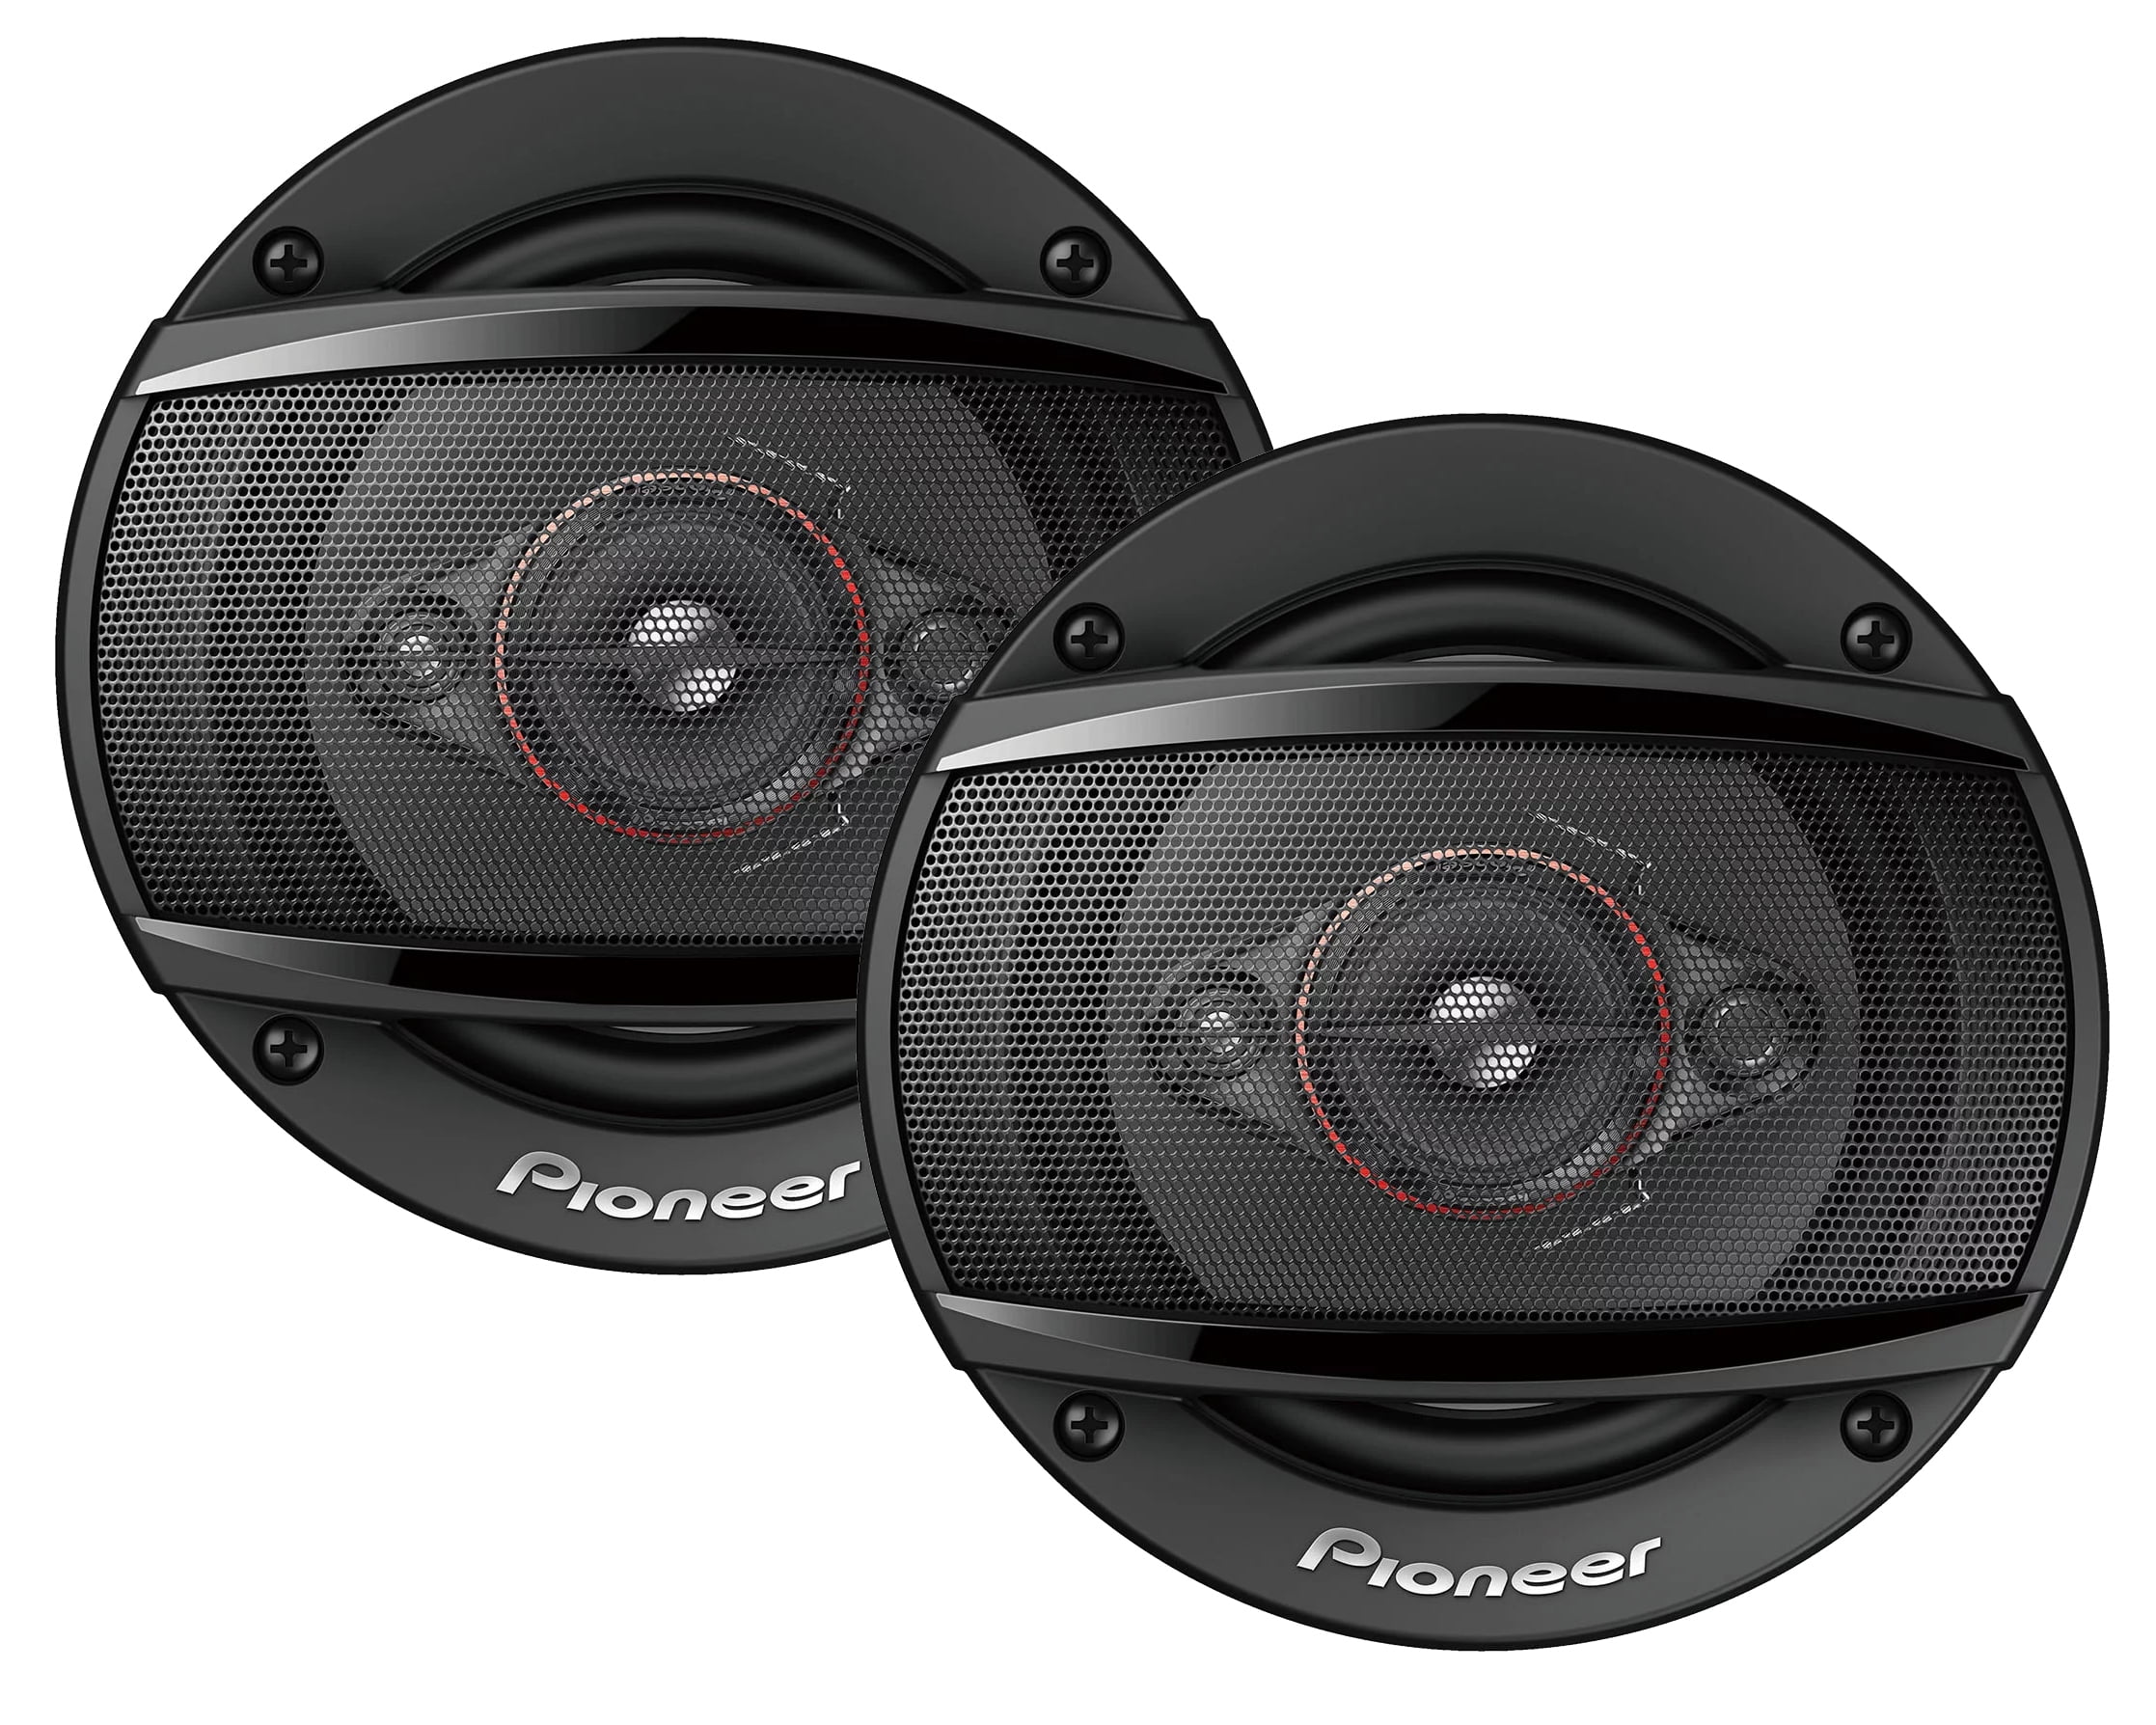 Pioneer TS-500M 5-1/4" - 4-way 300 W Max Power | 11mm Tweeter and 11mm Super Tweeter and 1-5/8" Cone Midrange | Coaxial Speakers | (Sold in Pairs)